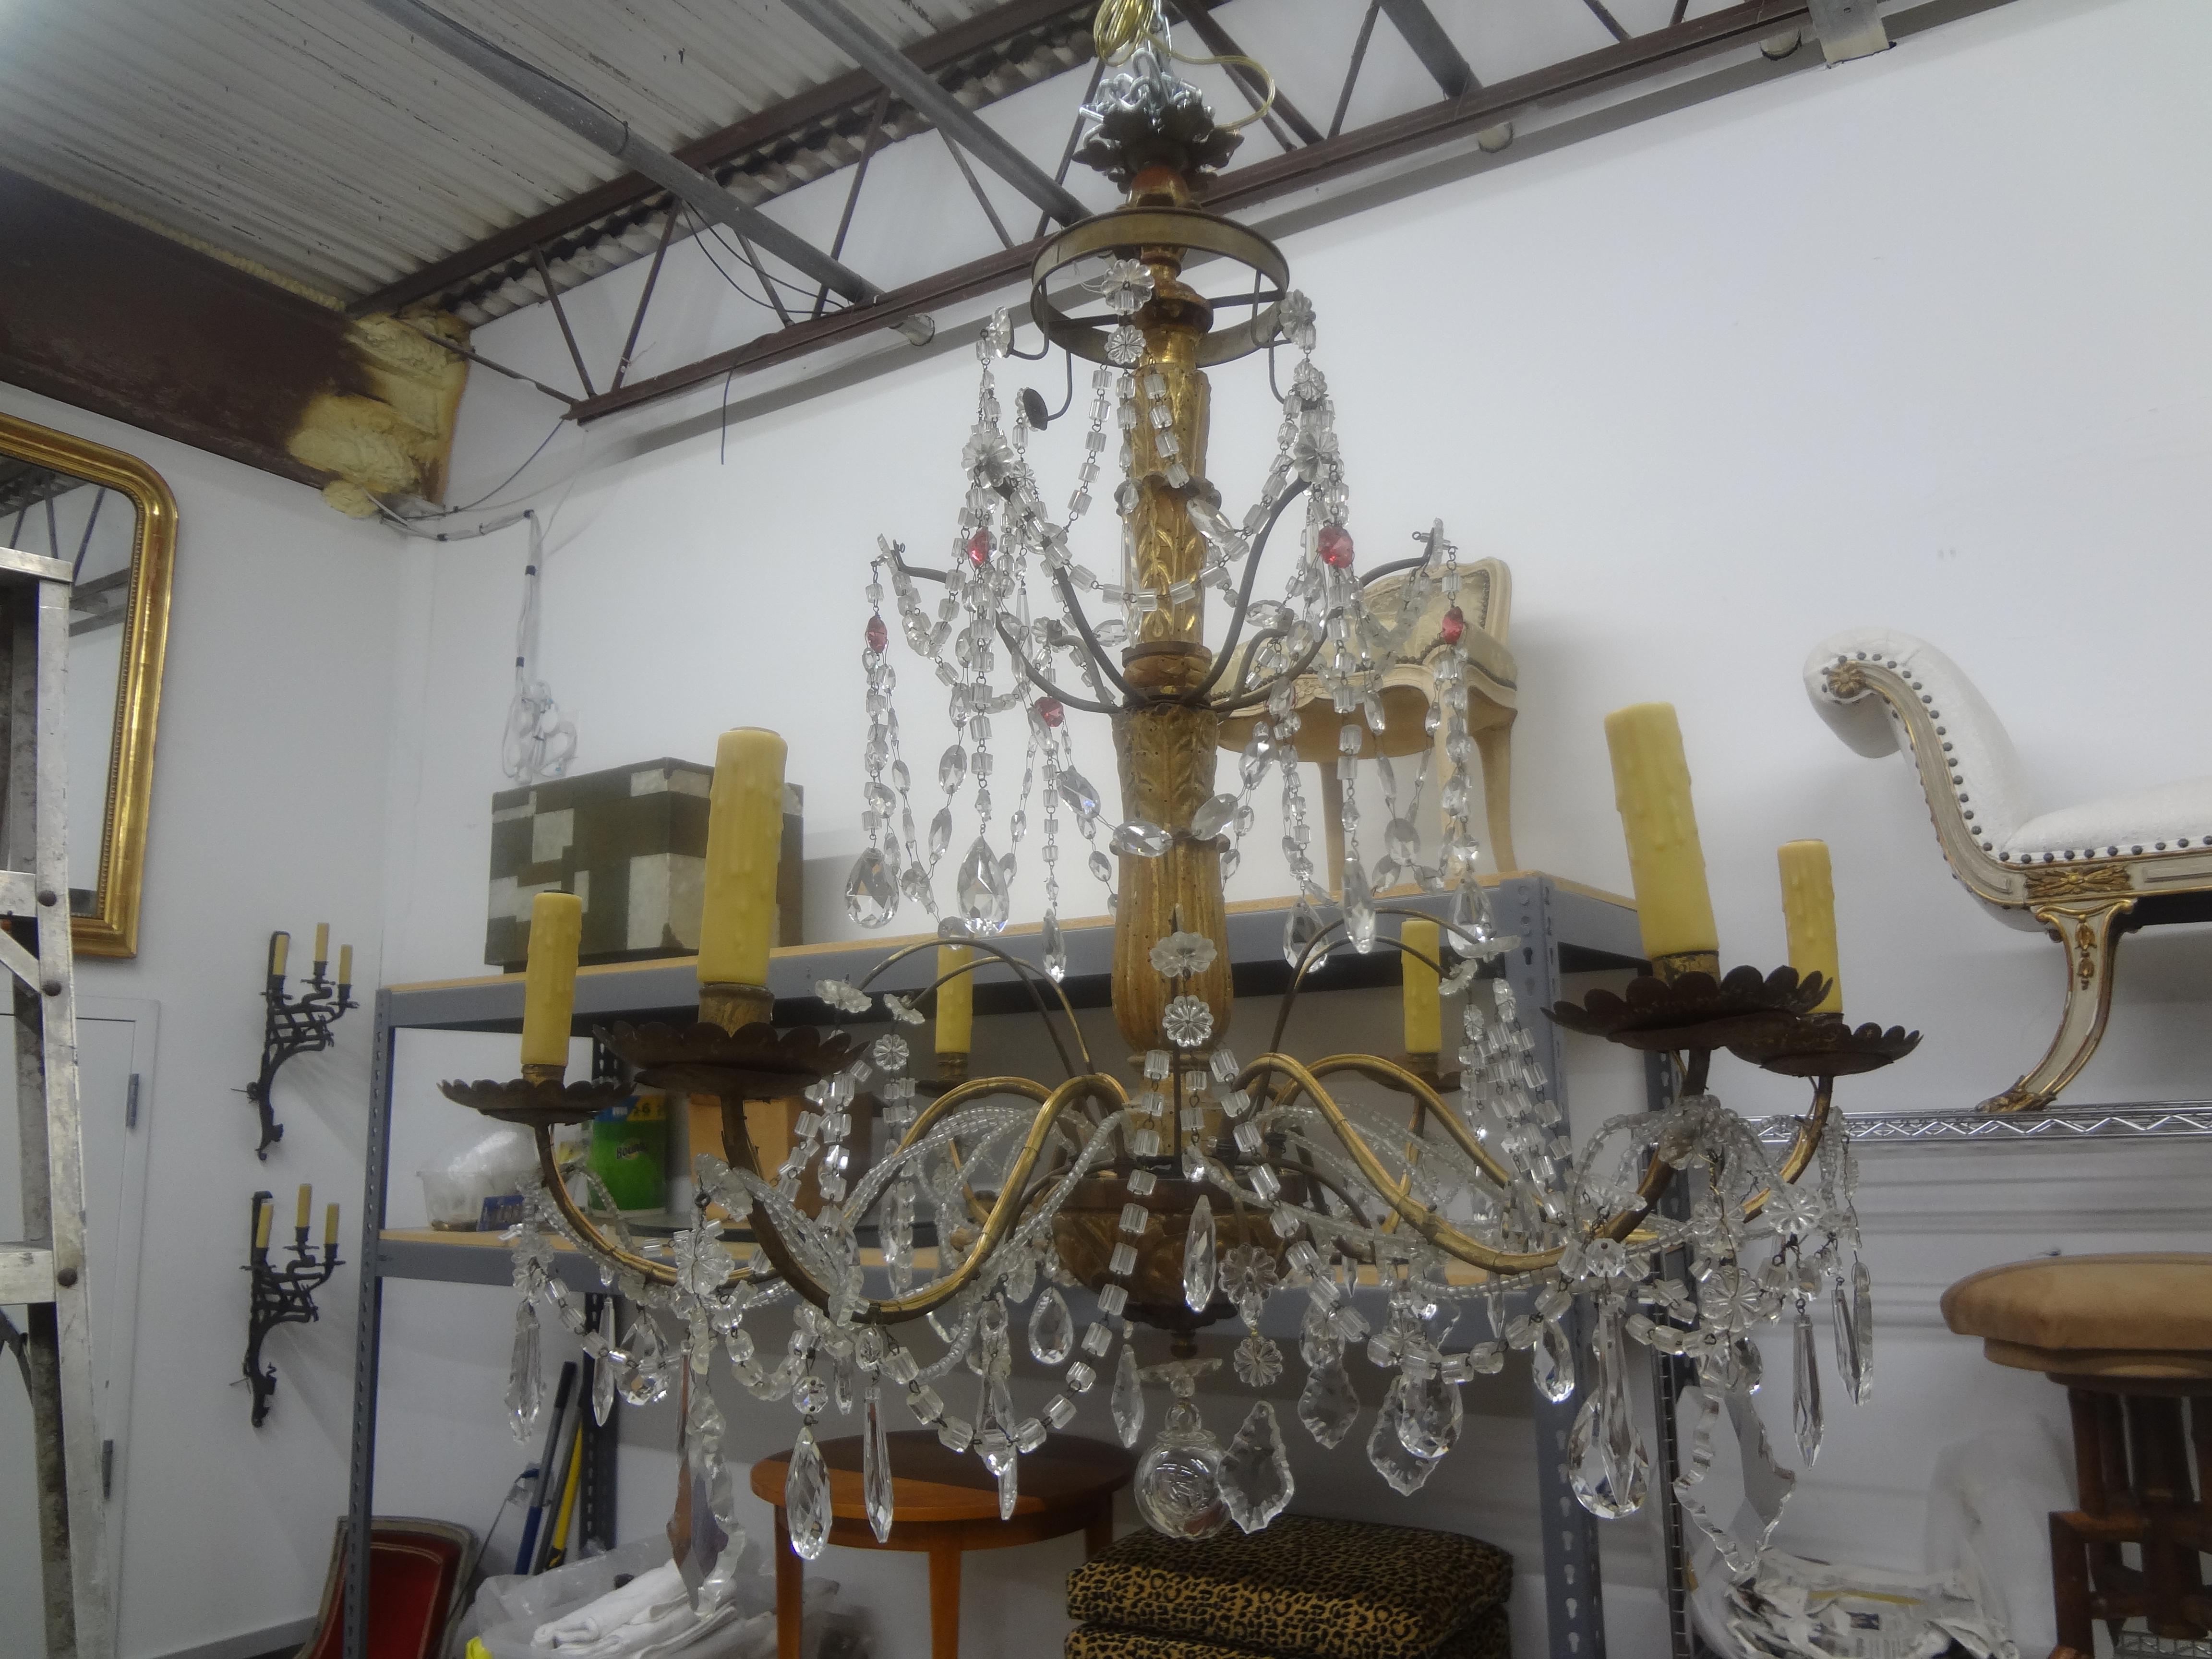 19th Century Italian Genovese Giltwood and Crystal Chandelier.
Stunning antique Italian Genovese gilt wood and crystal six arm chandelier. This lovely crystal chandelier has unusual pink crystals and has been newly wired with new sockets for the